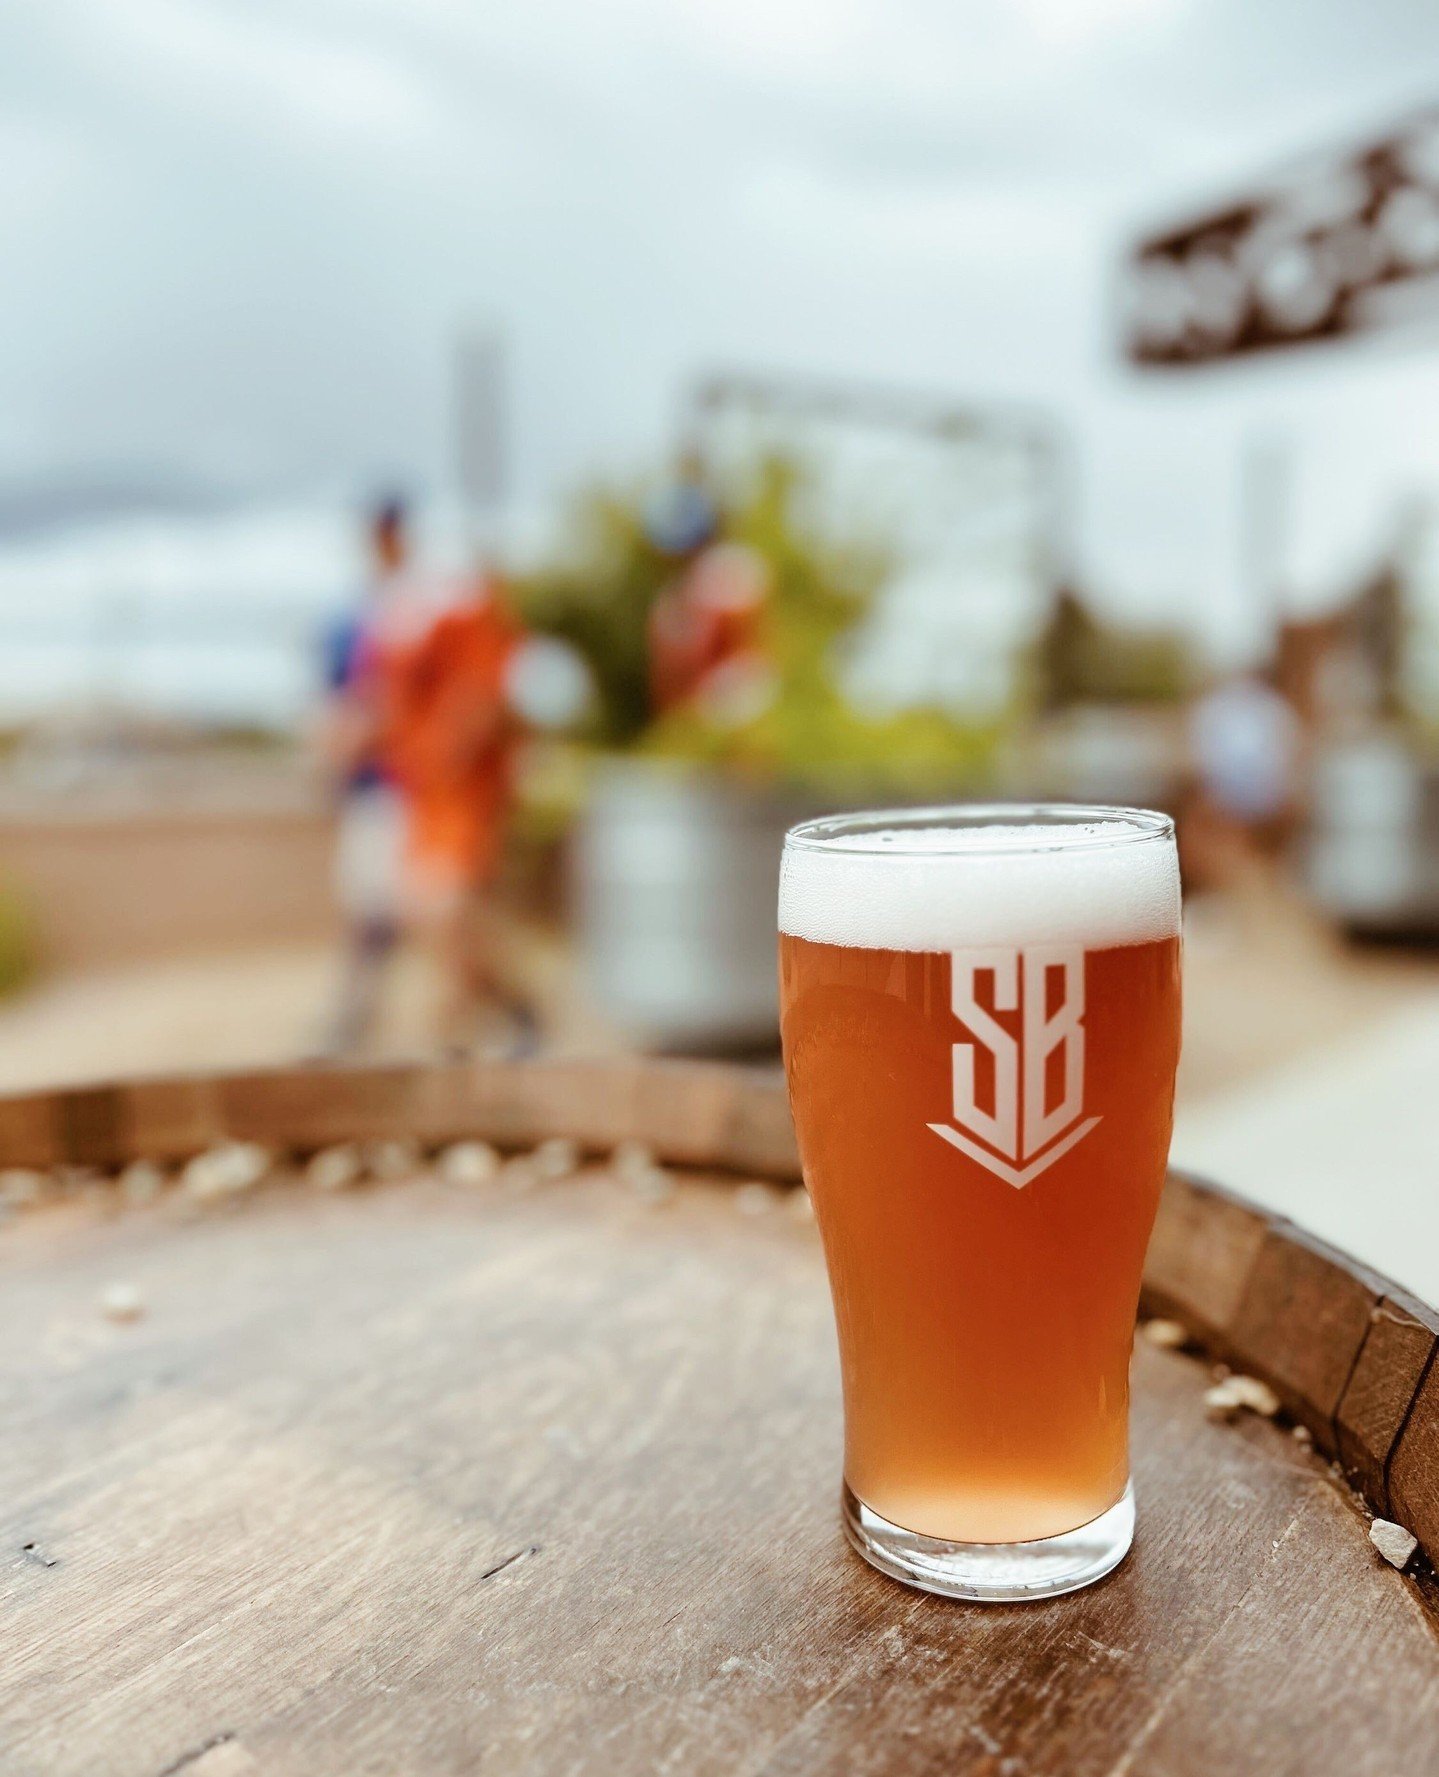 Comfortably Plum Saison...⁠
A #farmhouseale that's as pretty in the glass as it is on the palate. ⁠
⁠
⁠
#BuiltToBrew #NMcraftbeer #saison